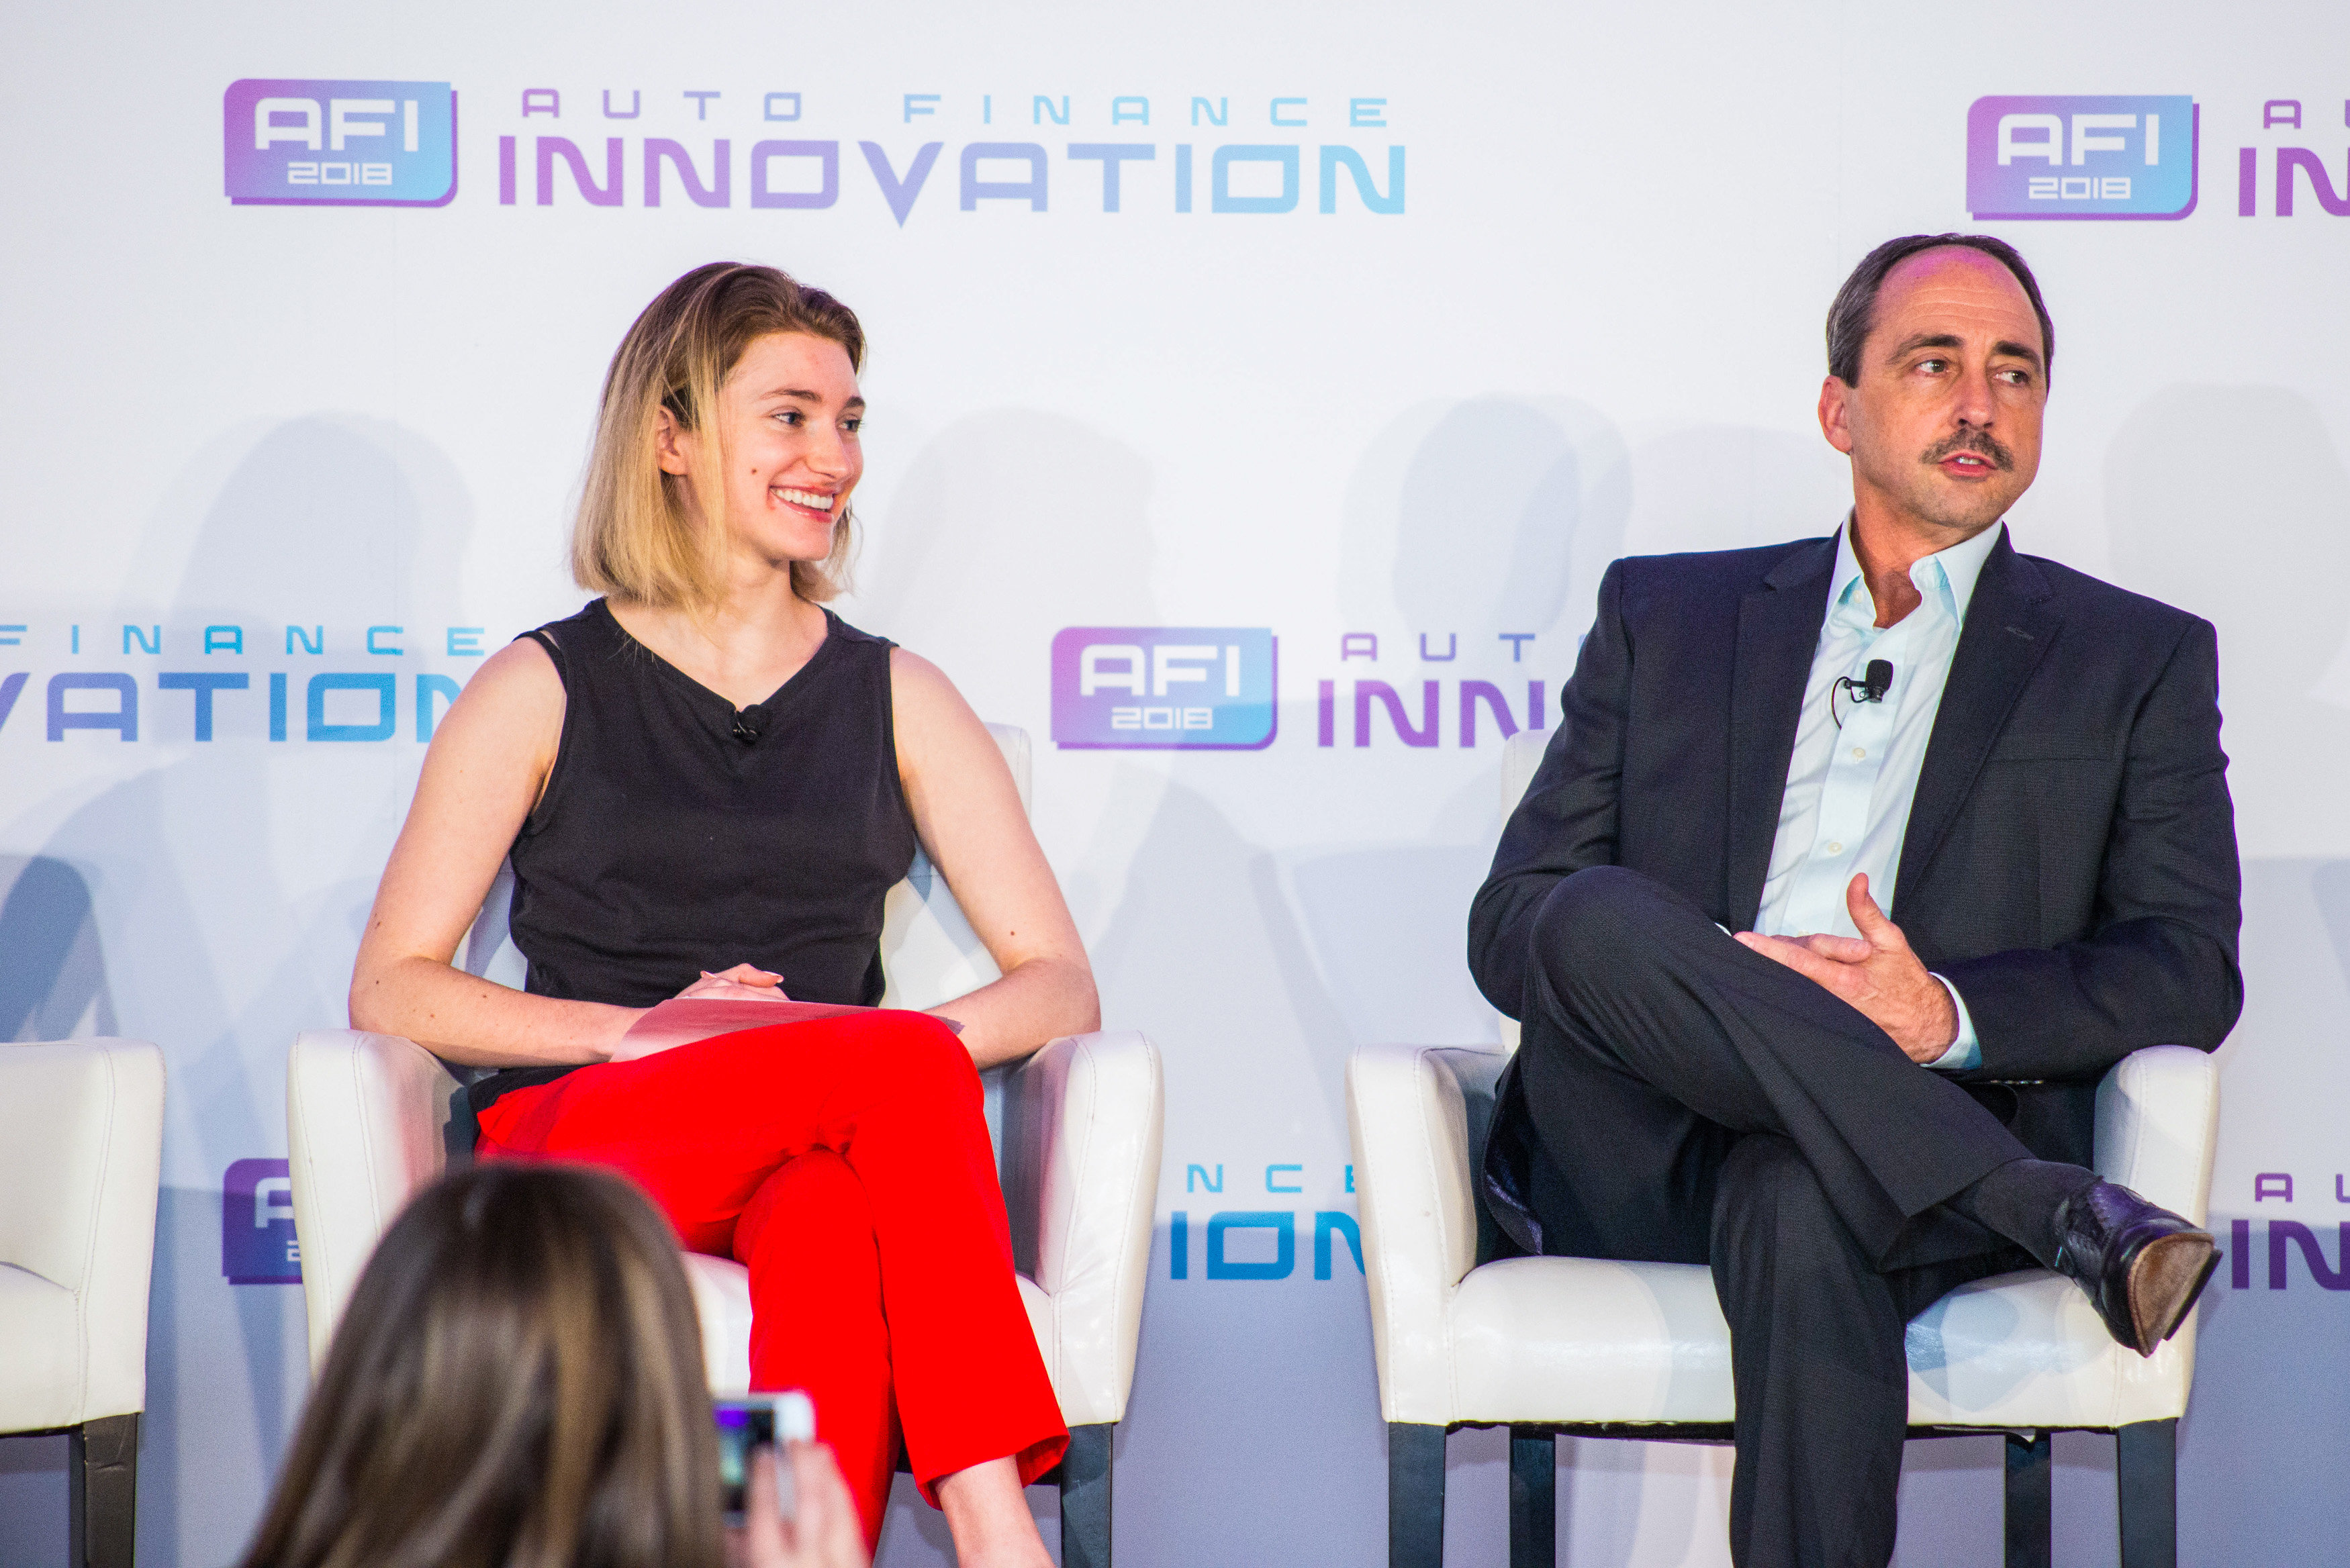 Larry Dominique, president and chief executive at Group PSA North America, sits down for a "fireside chat" at Auto Finance Innovation 2018 in San Francisco. (Photo by Lensology.net)